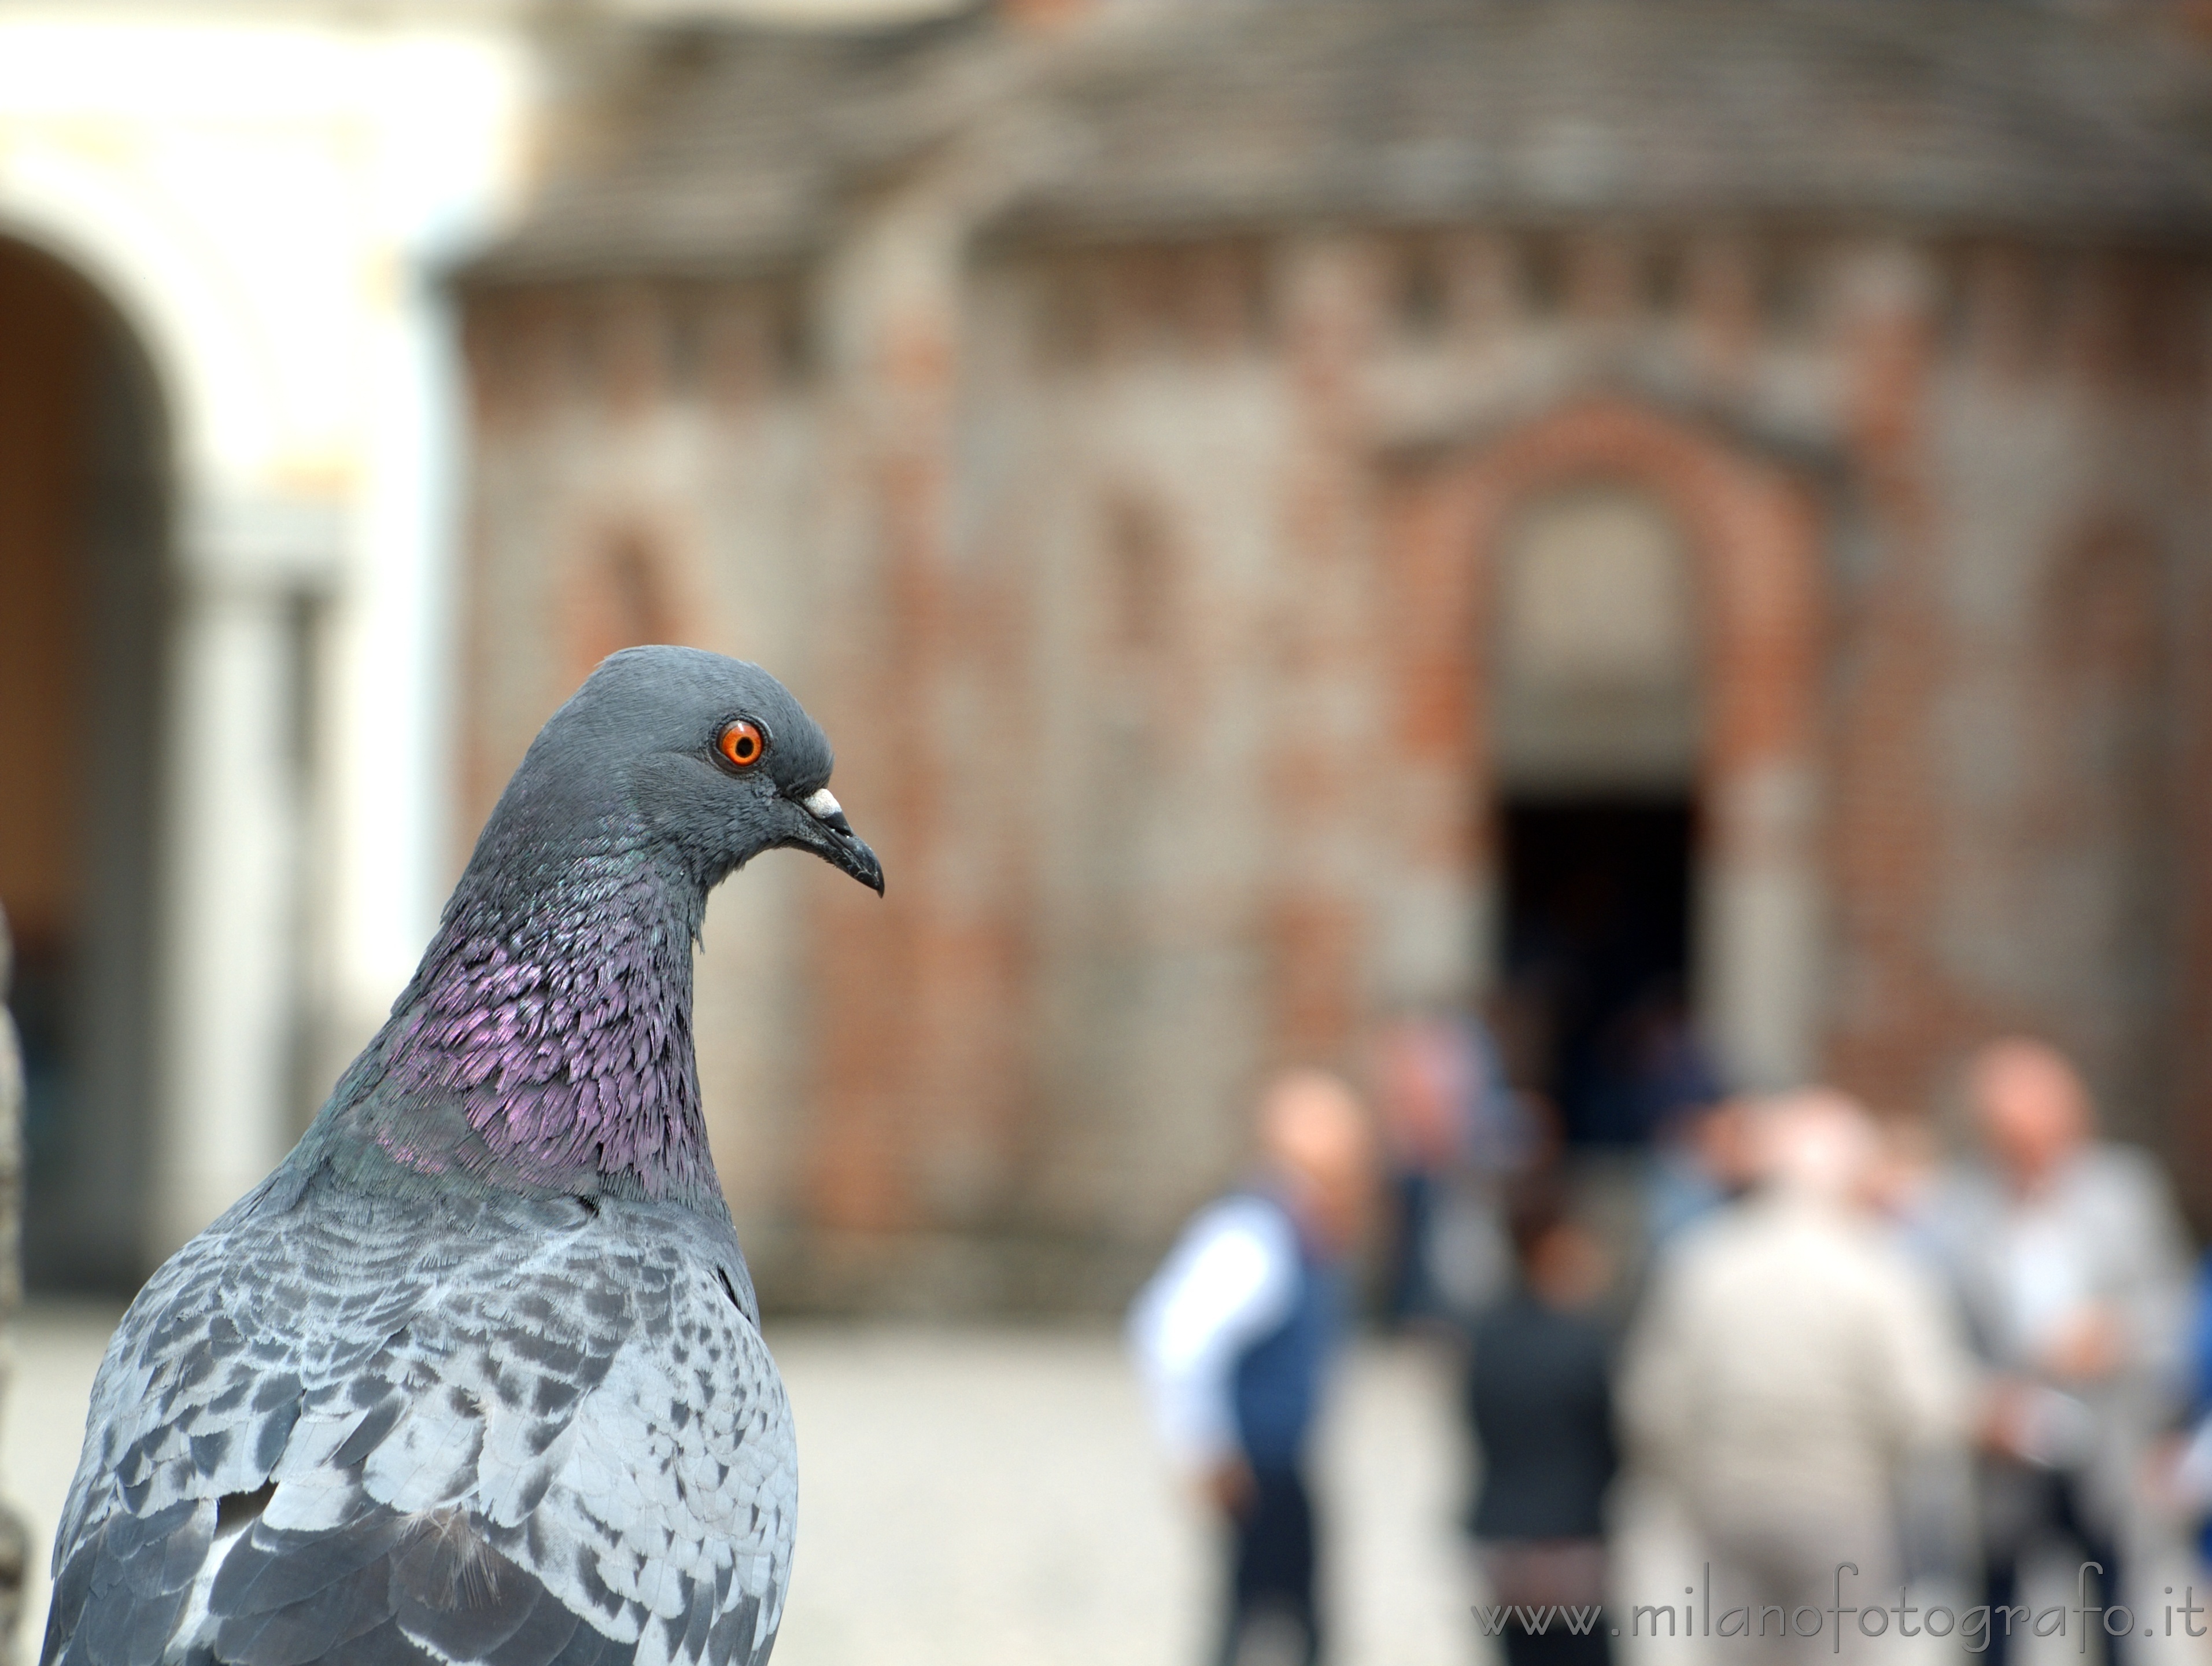 Biella (Italy): Pigeon with the baptistery of the Cathedral of Biella in the background - Biella (Italy)